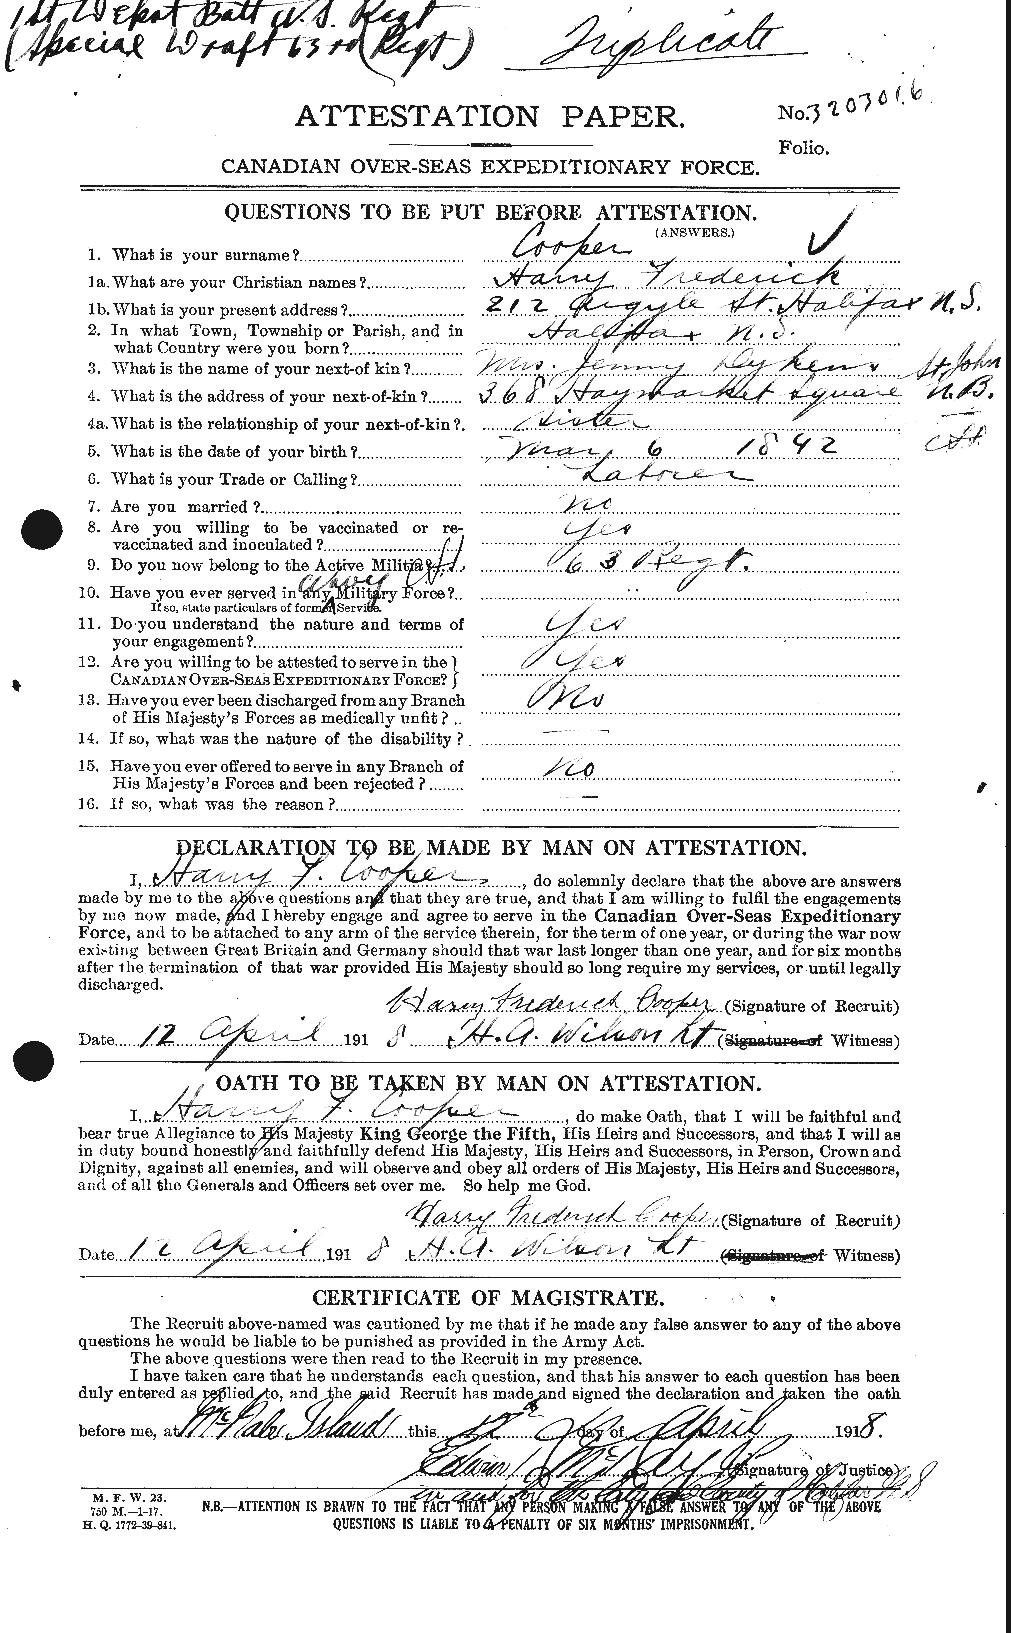 Personnel Records of the First World War - CEF 057122a